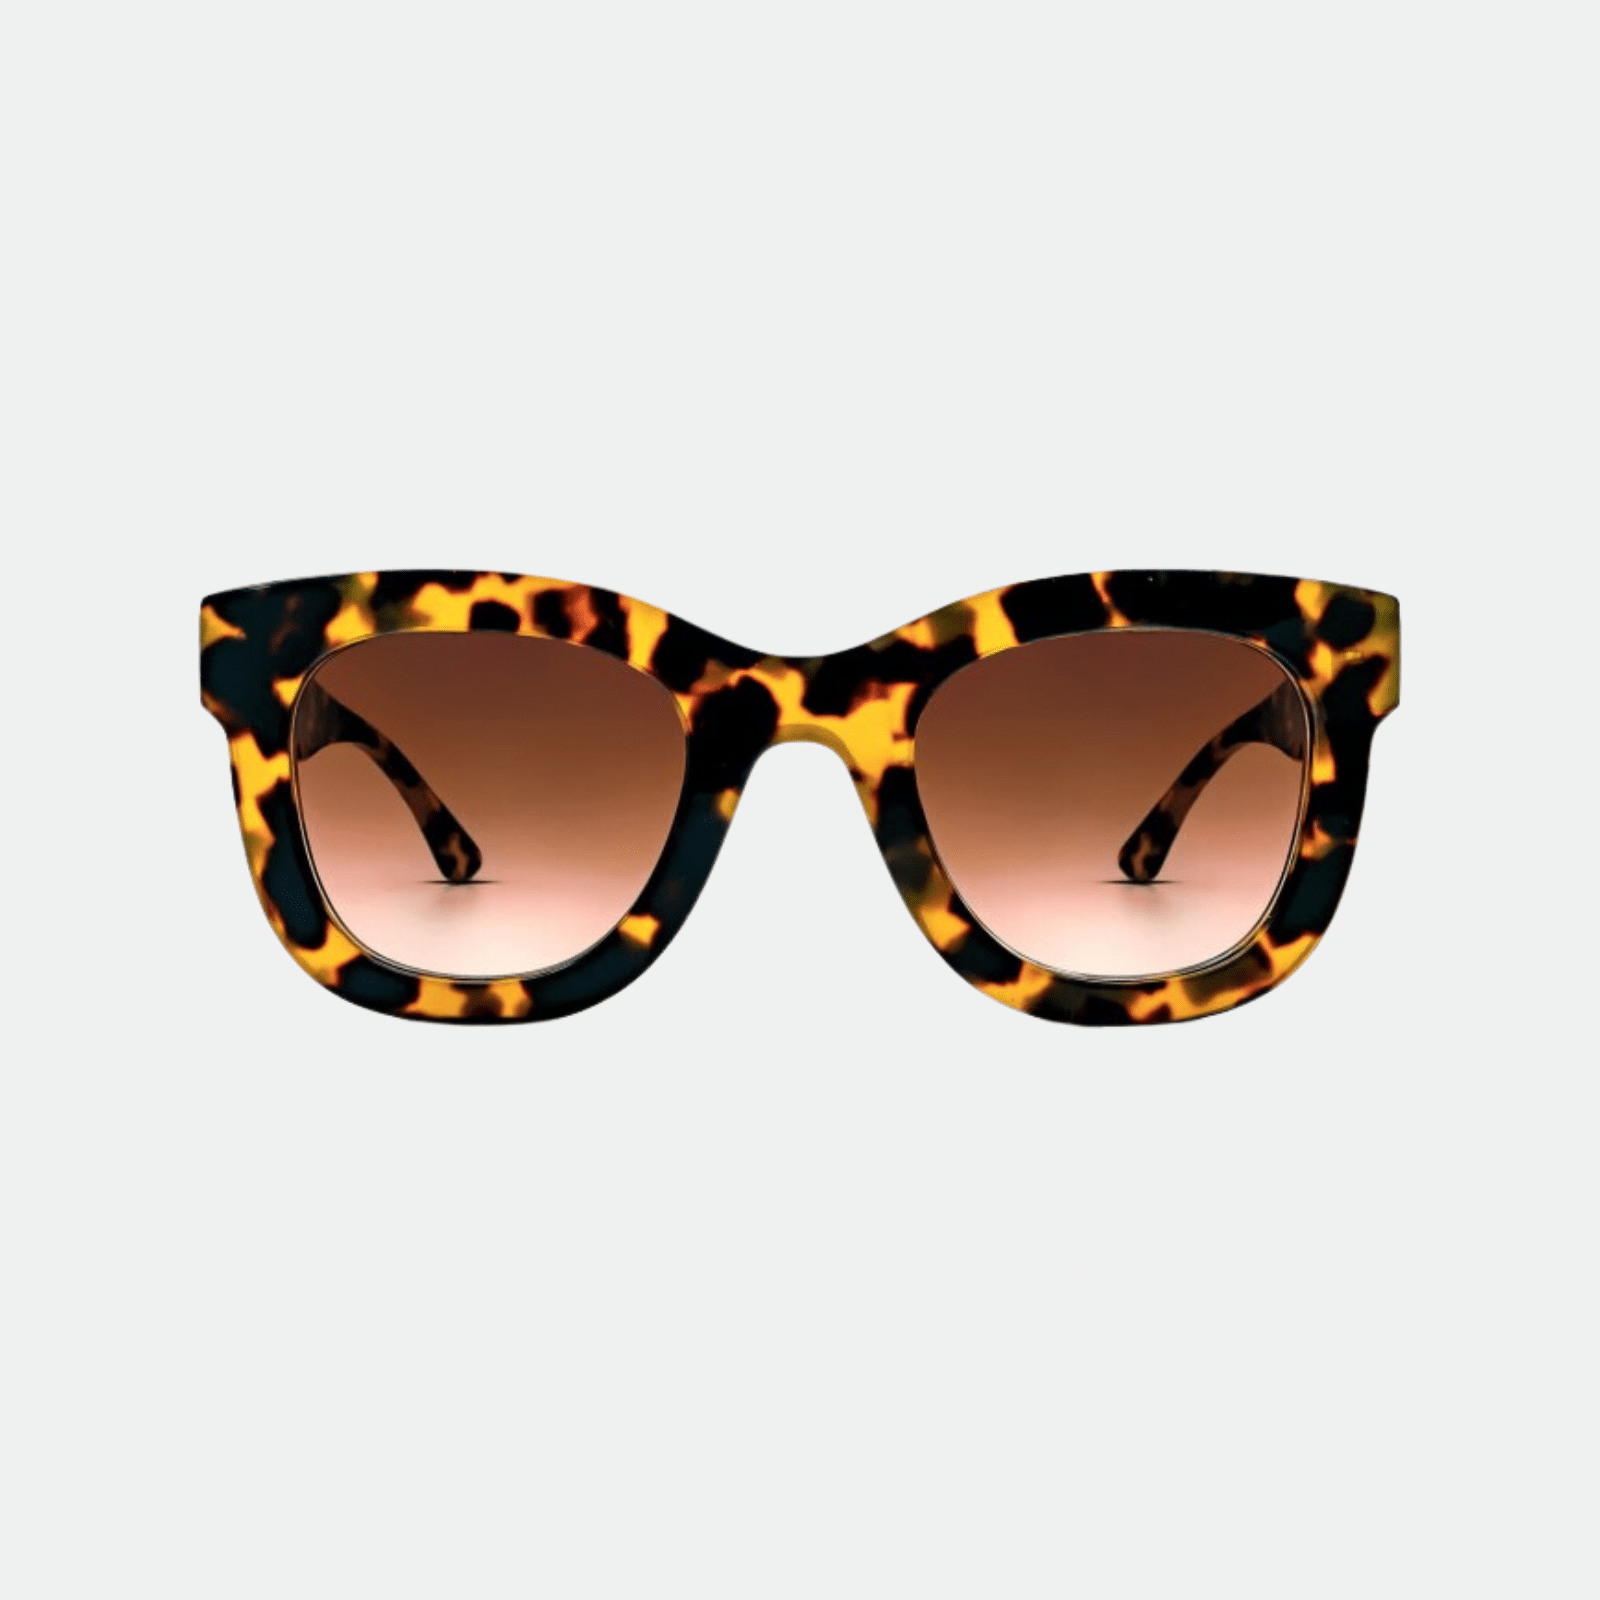 Thierry Lasry Gambly - Tokyo Tortoise